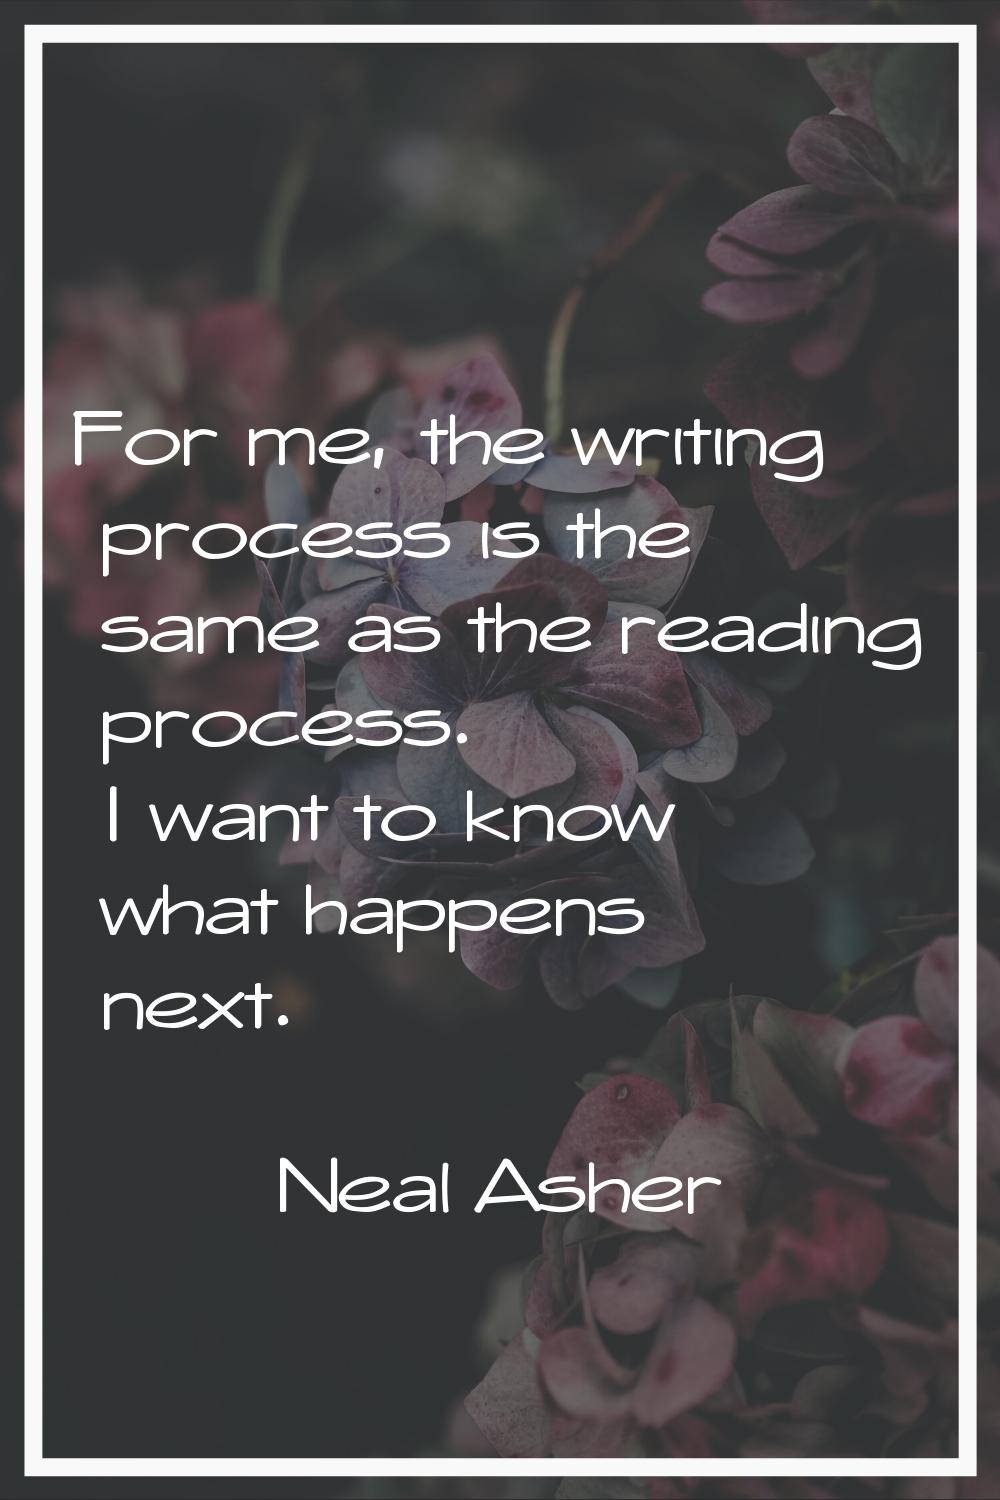 For me, the writing process is the same as the reading process. I want to know what happens next.